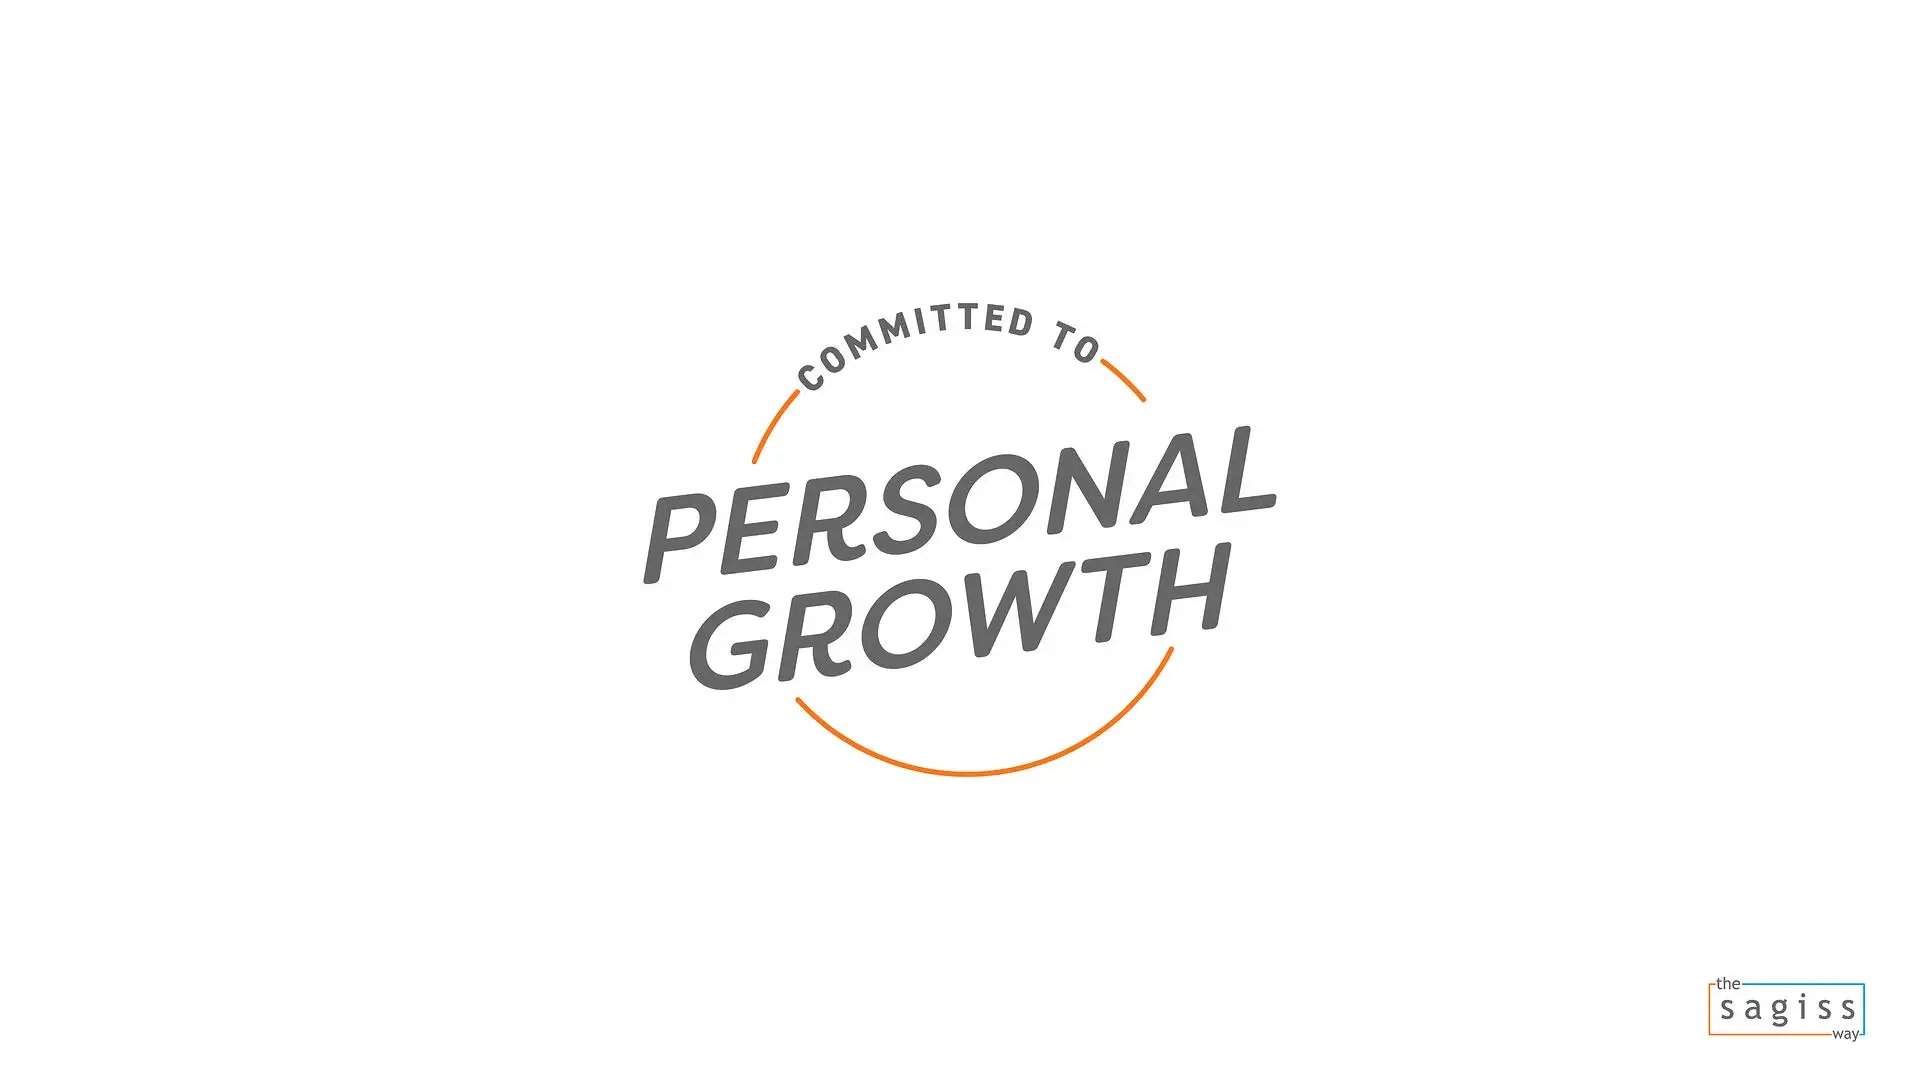 the-sagiss-way-commited-to-personal-growth